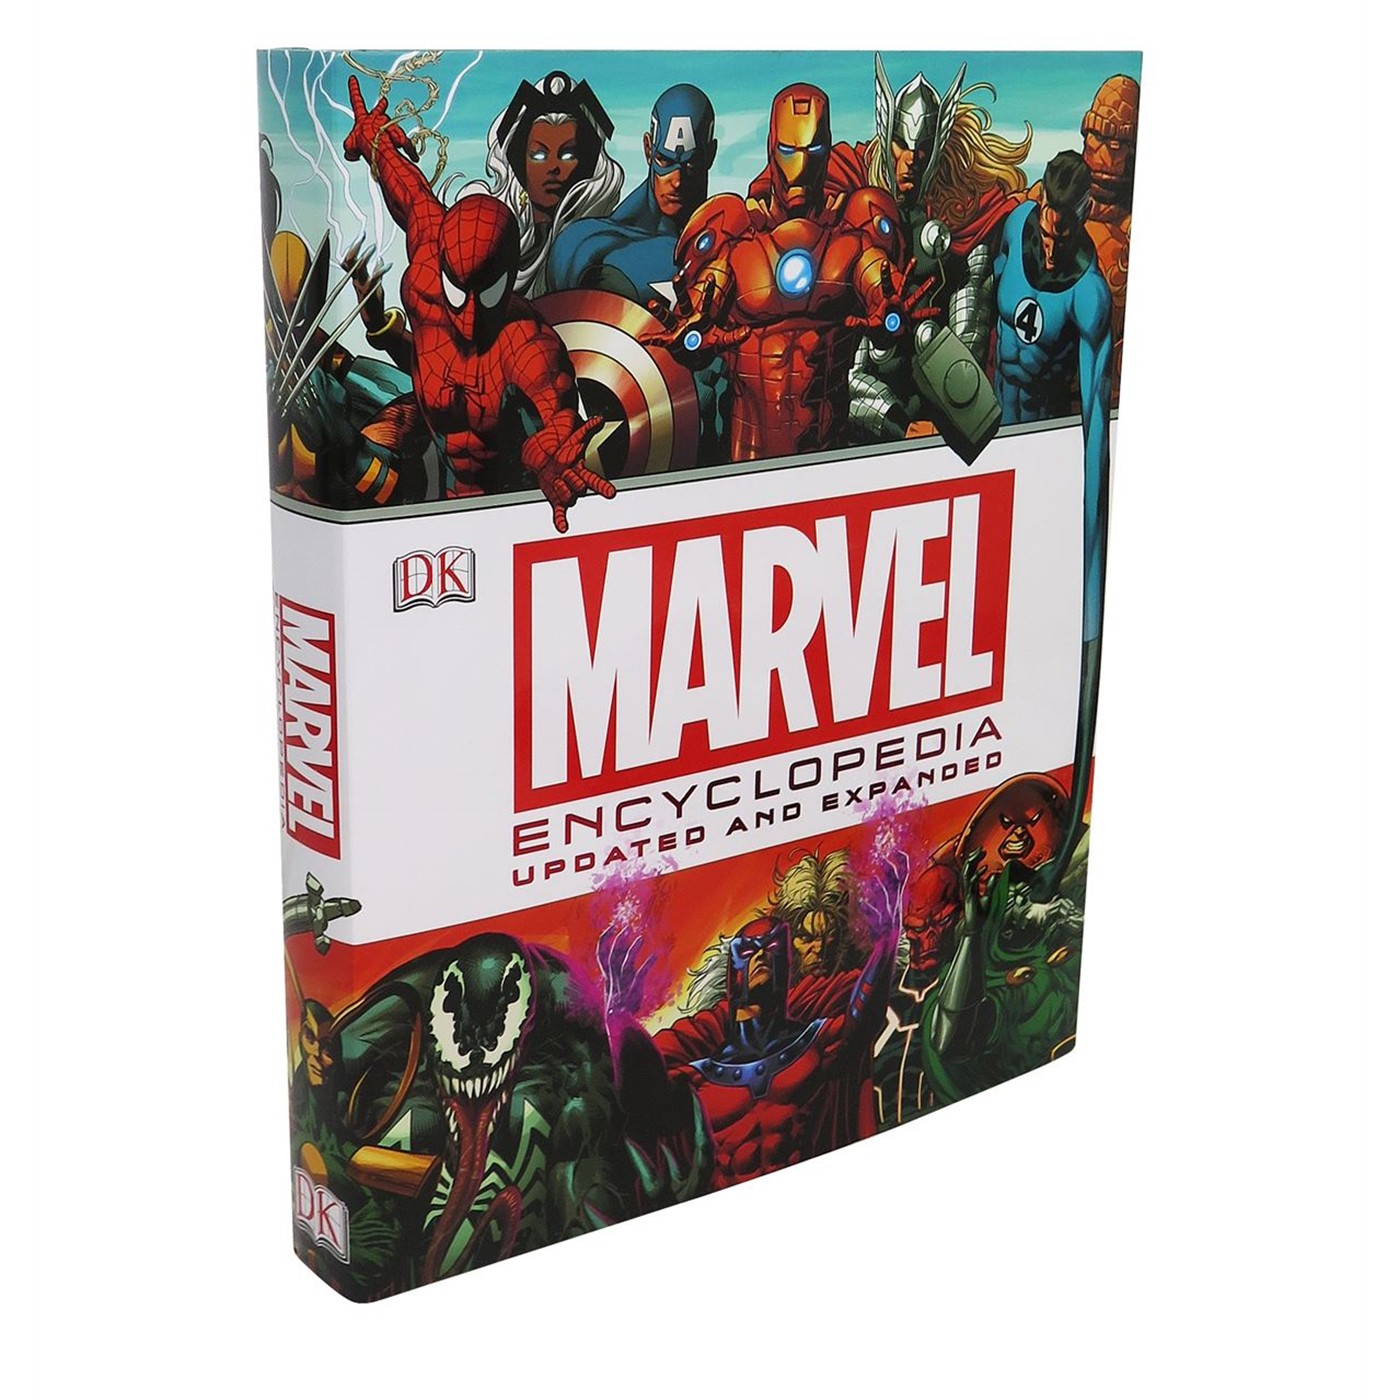 Marvel Encyclopedia Updated & Expanded Hardcover Book